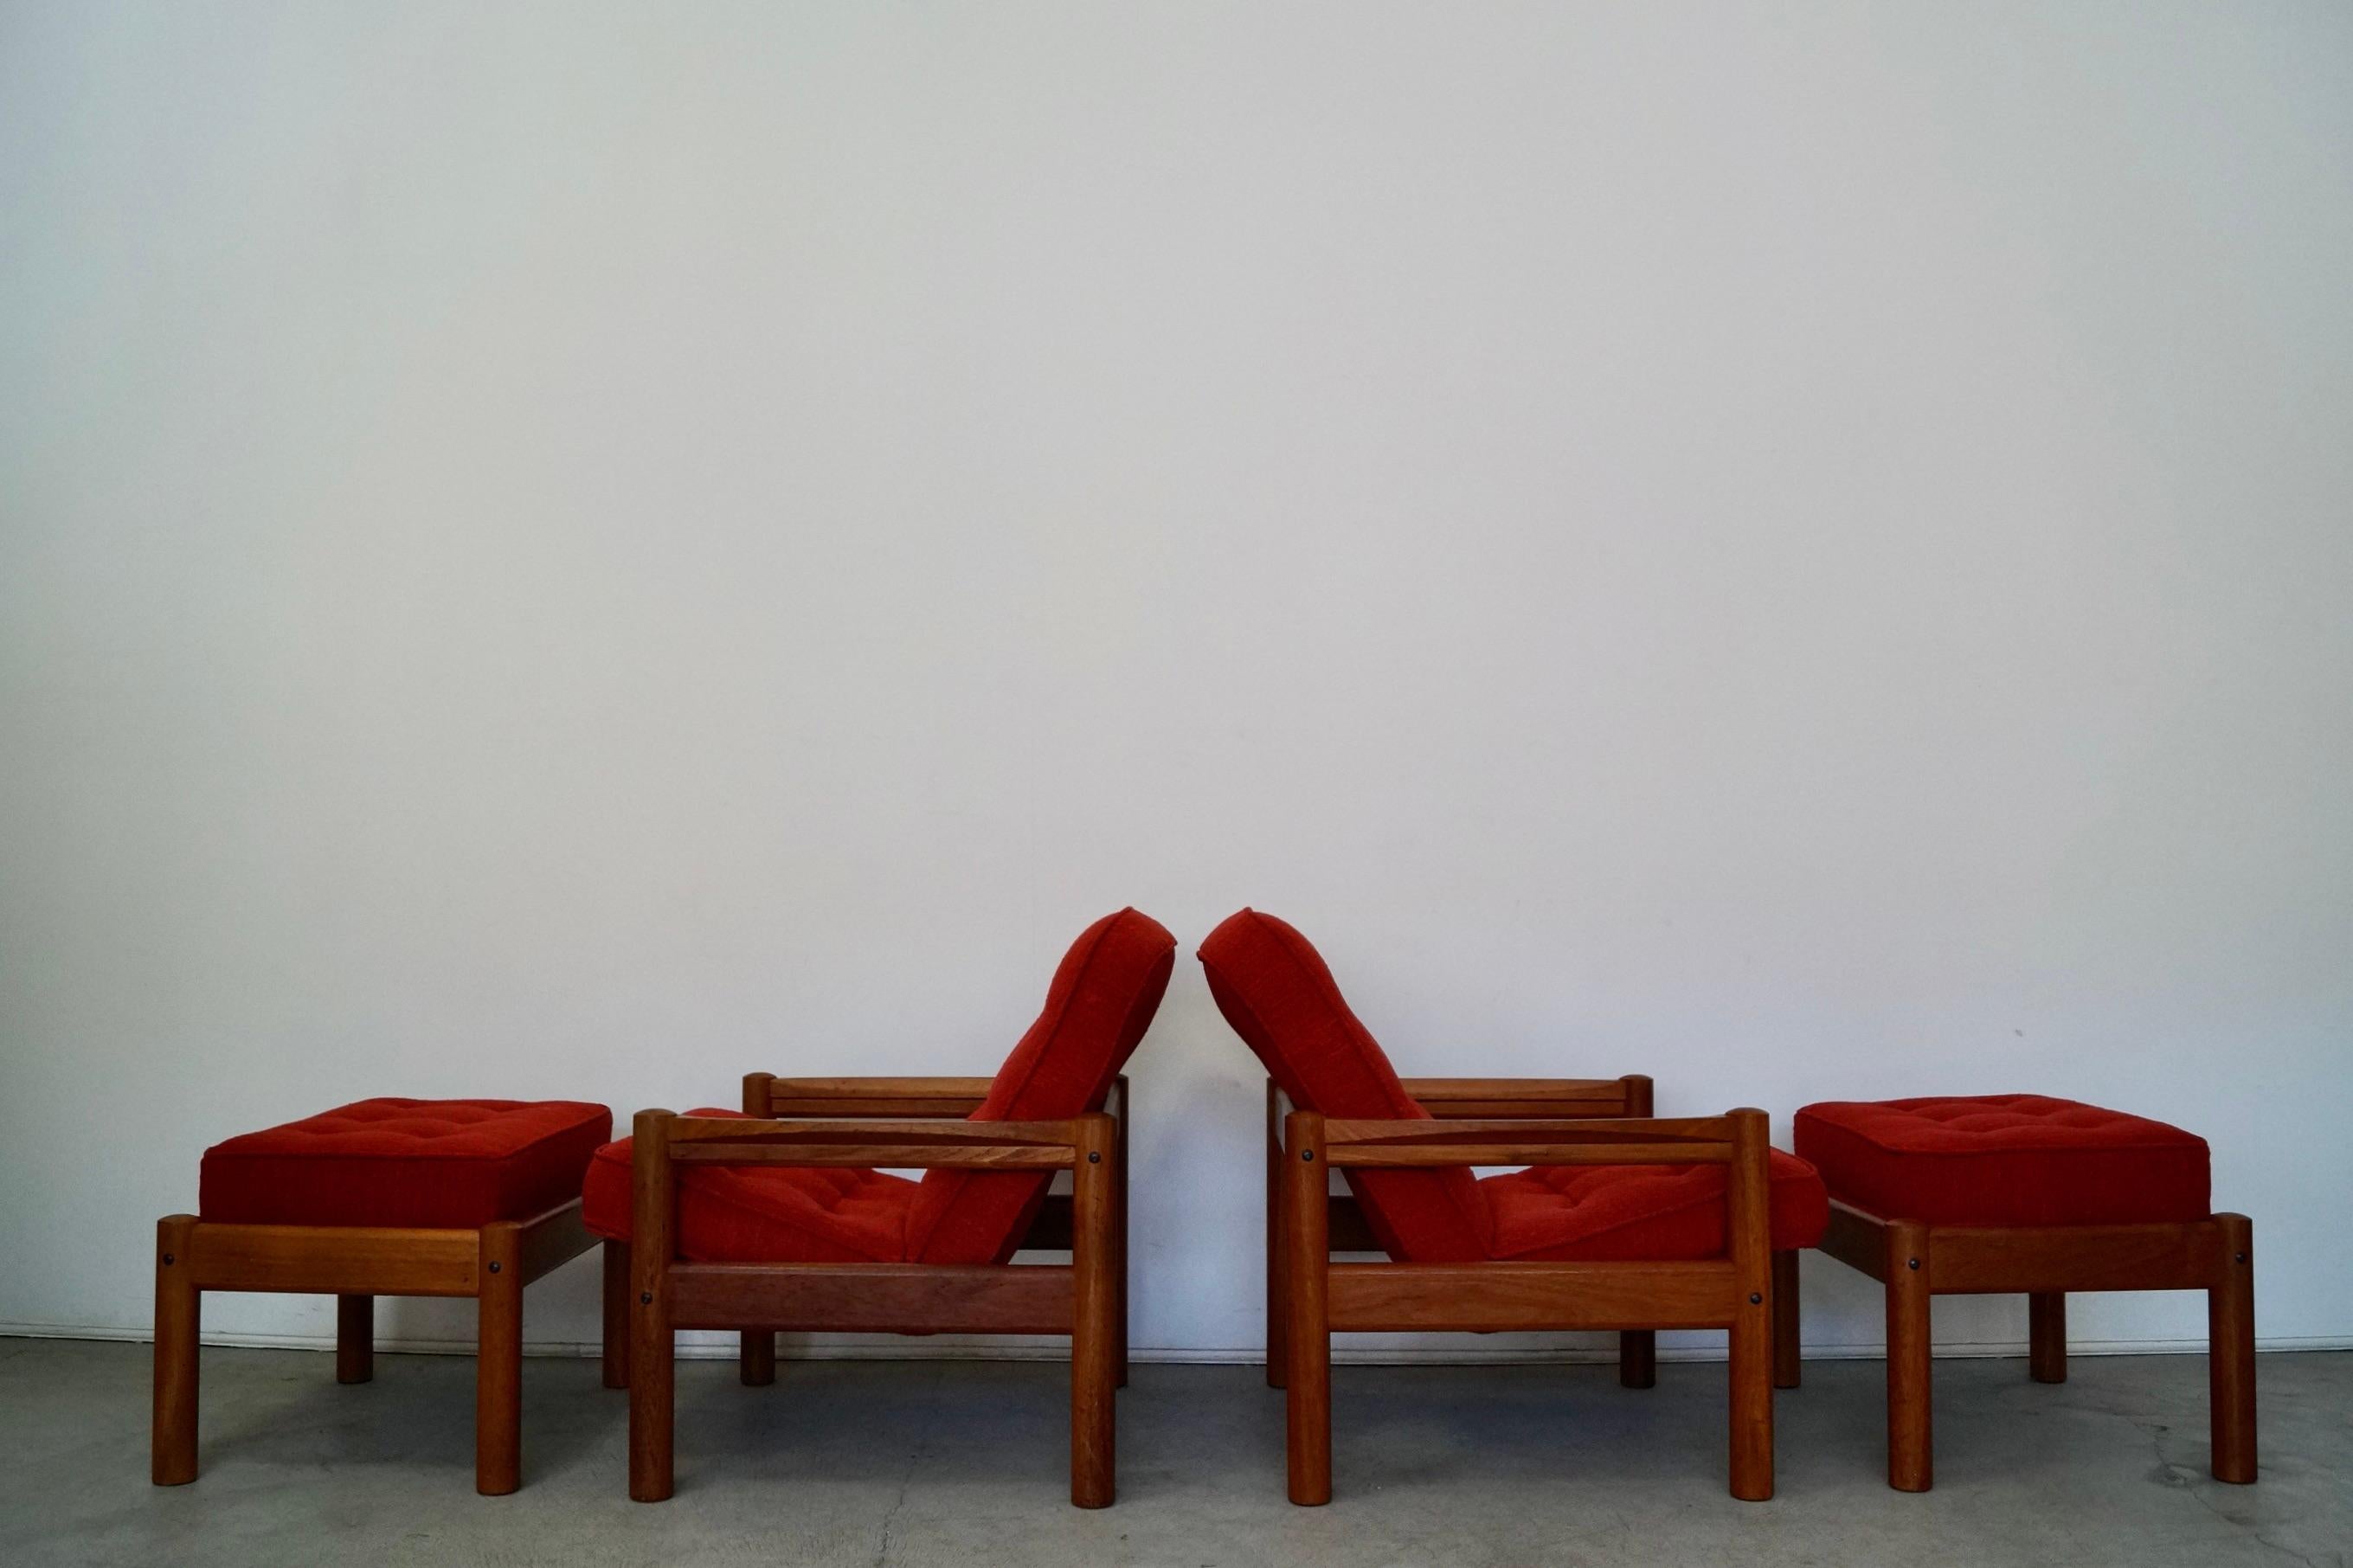 1970's Danish Modern Teak Lounge Chairs by Domino Mobler - a Pair In Excellent Condition For Sale In Burbank, CA